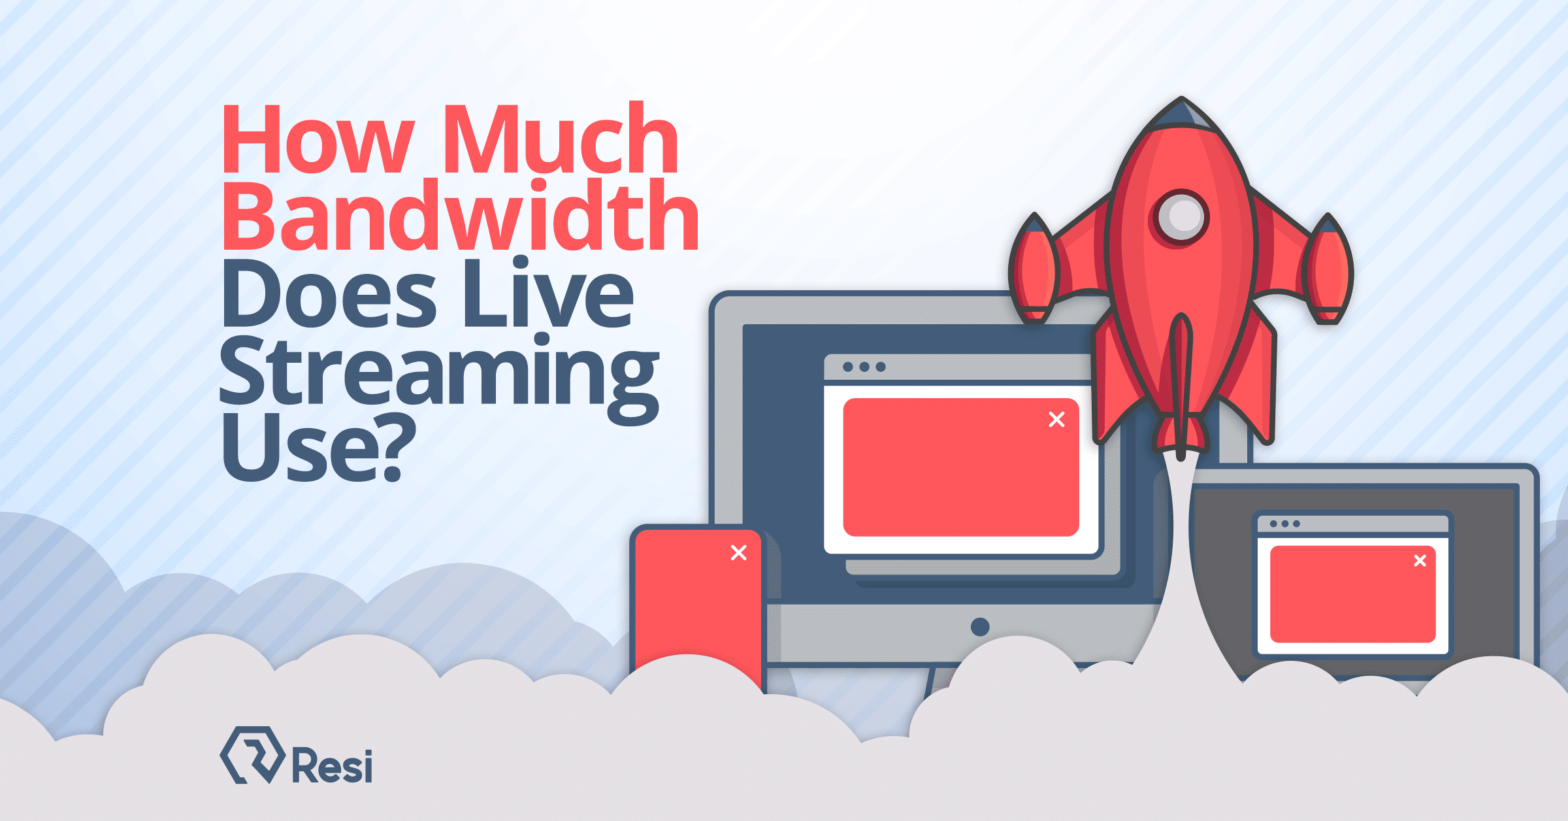 How Much Bandwidth Does Livestreaming Use?